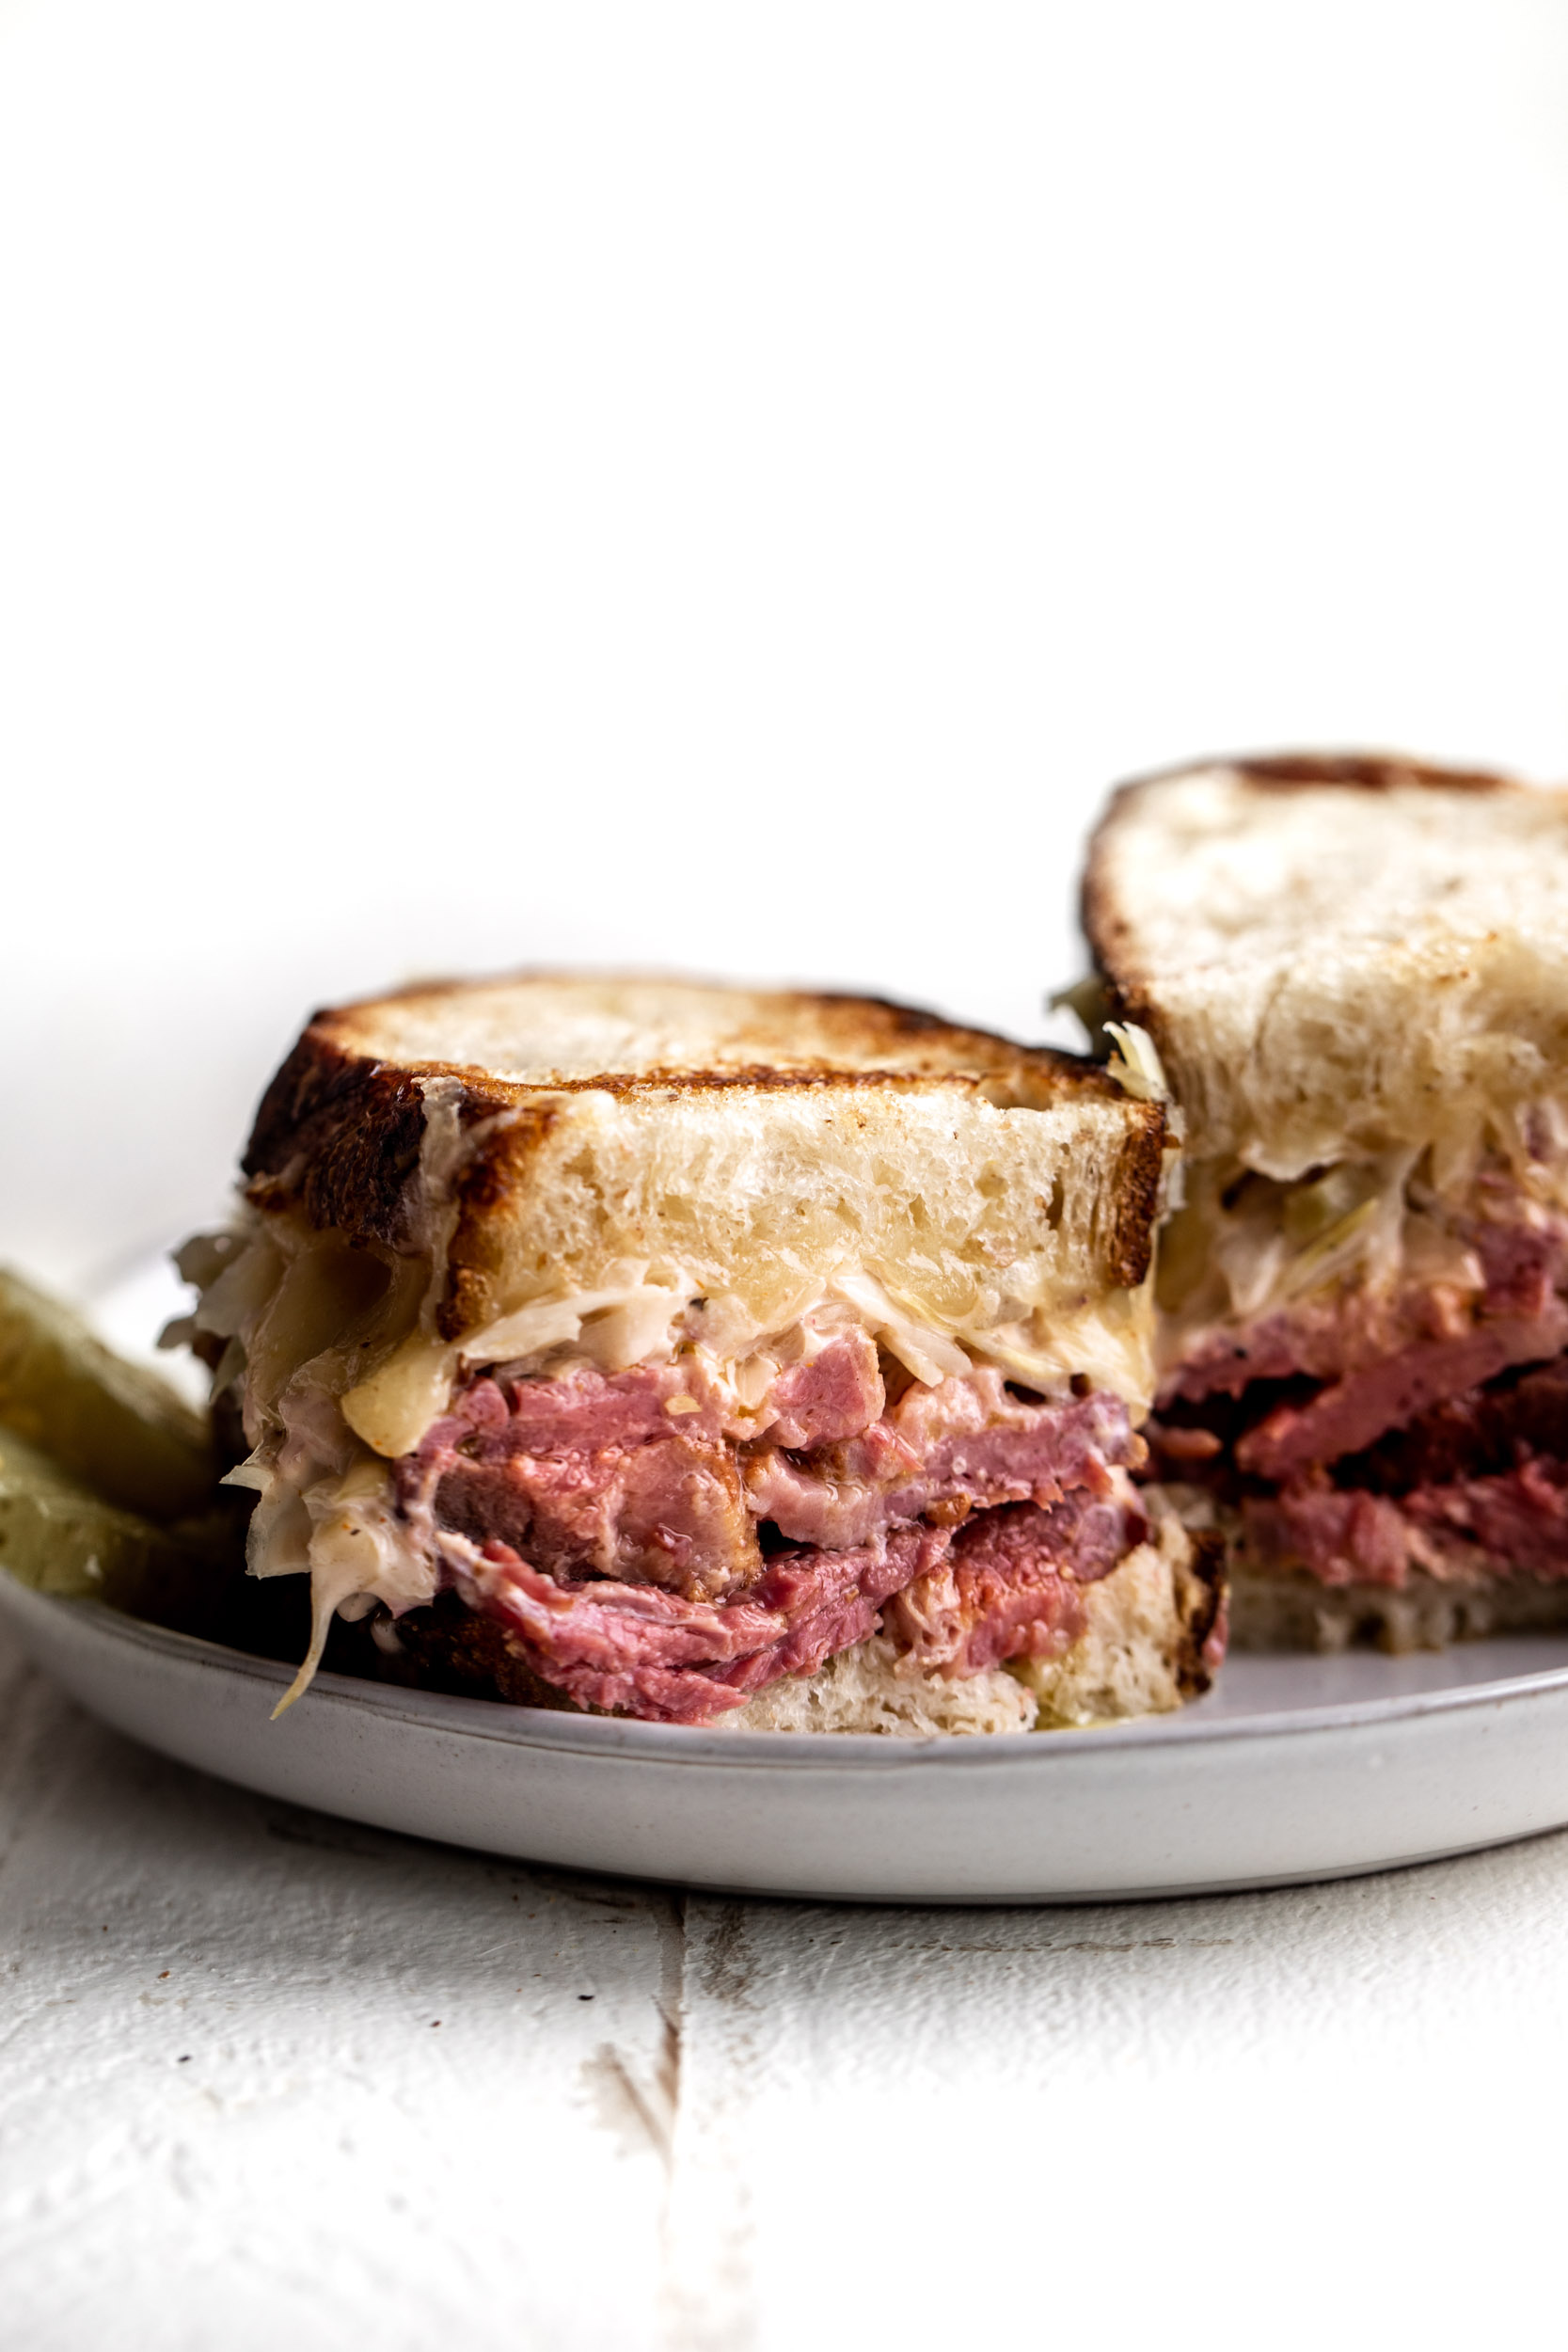 In a classic Reuben sandwich, slices of corned beef are served on sliced dark rye bread, with sliced Swiss cheese and fermented sauerkraut.